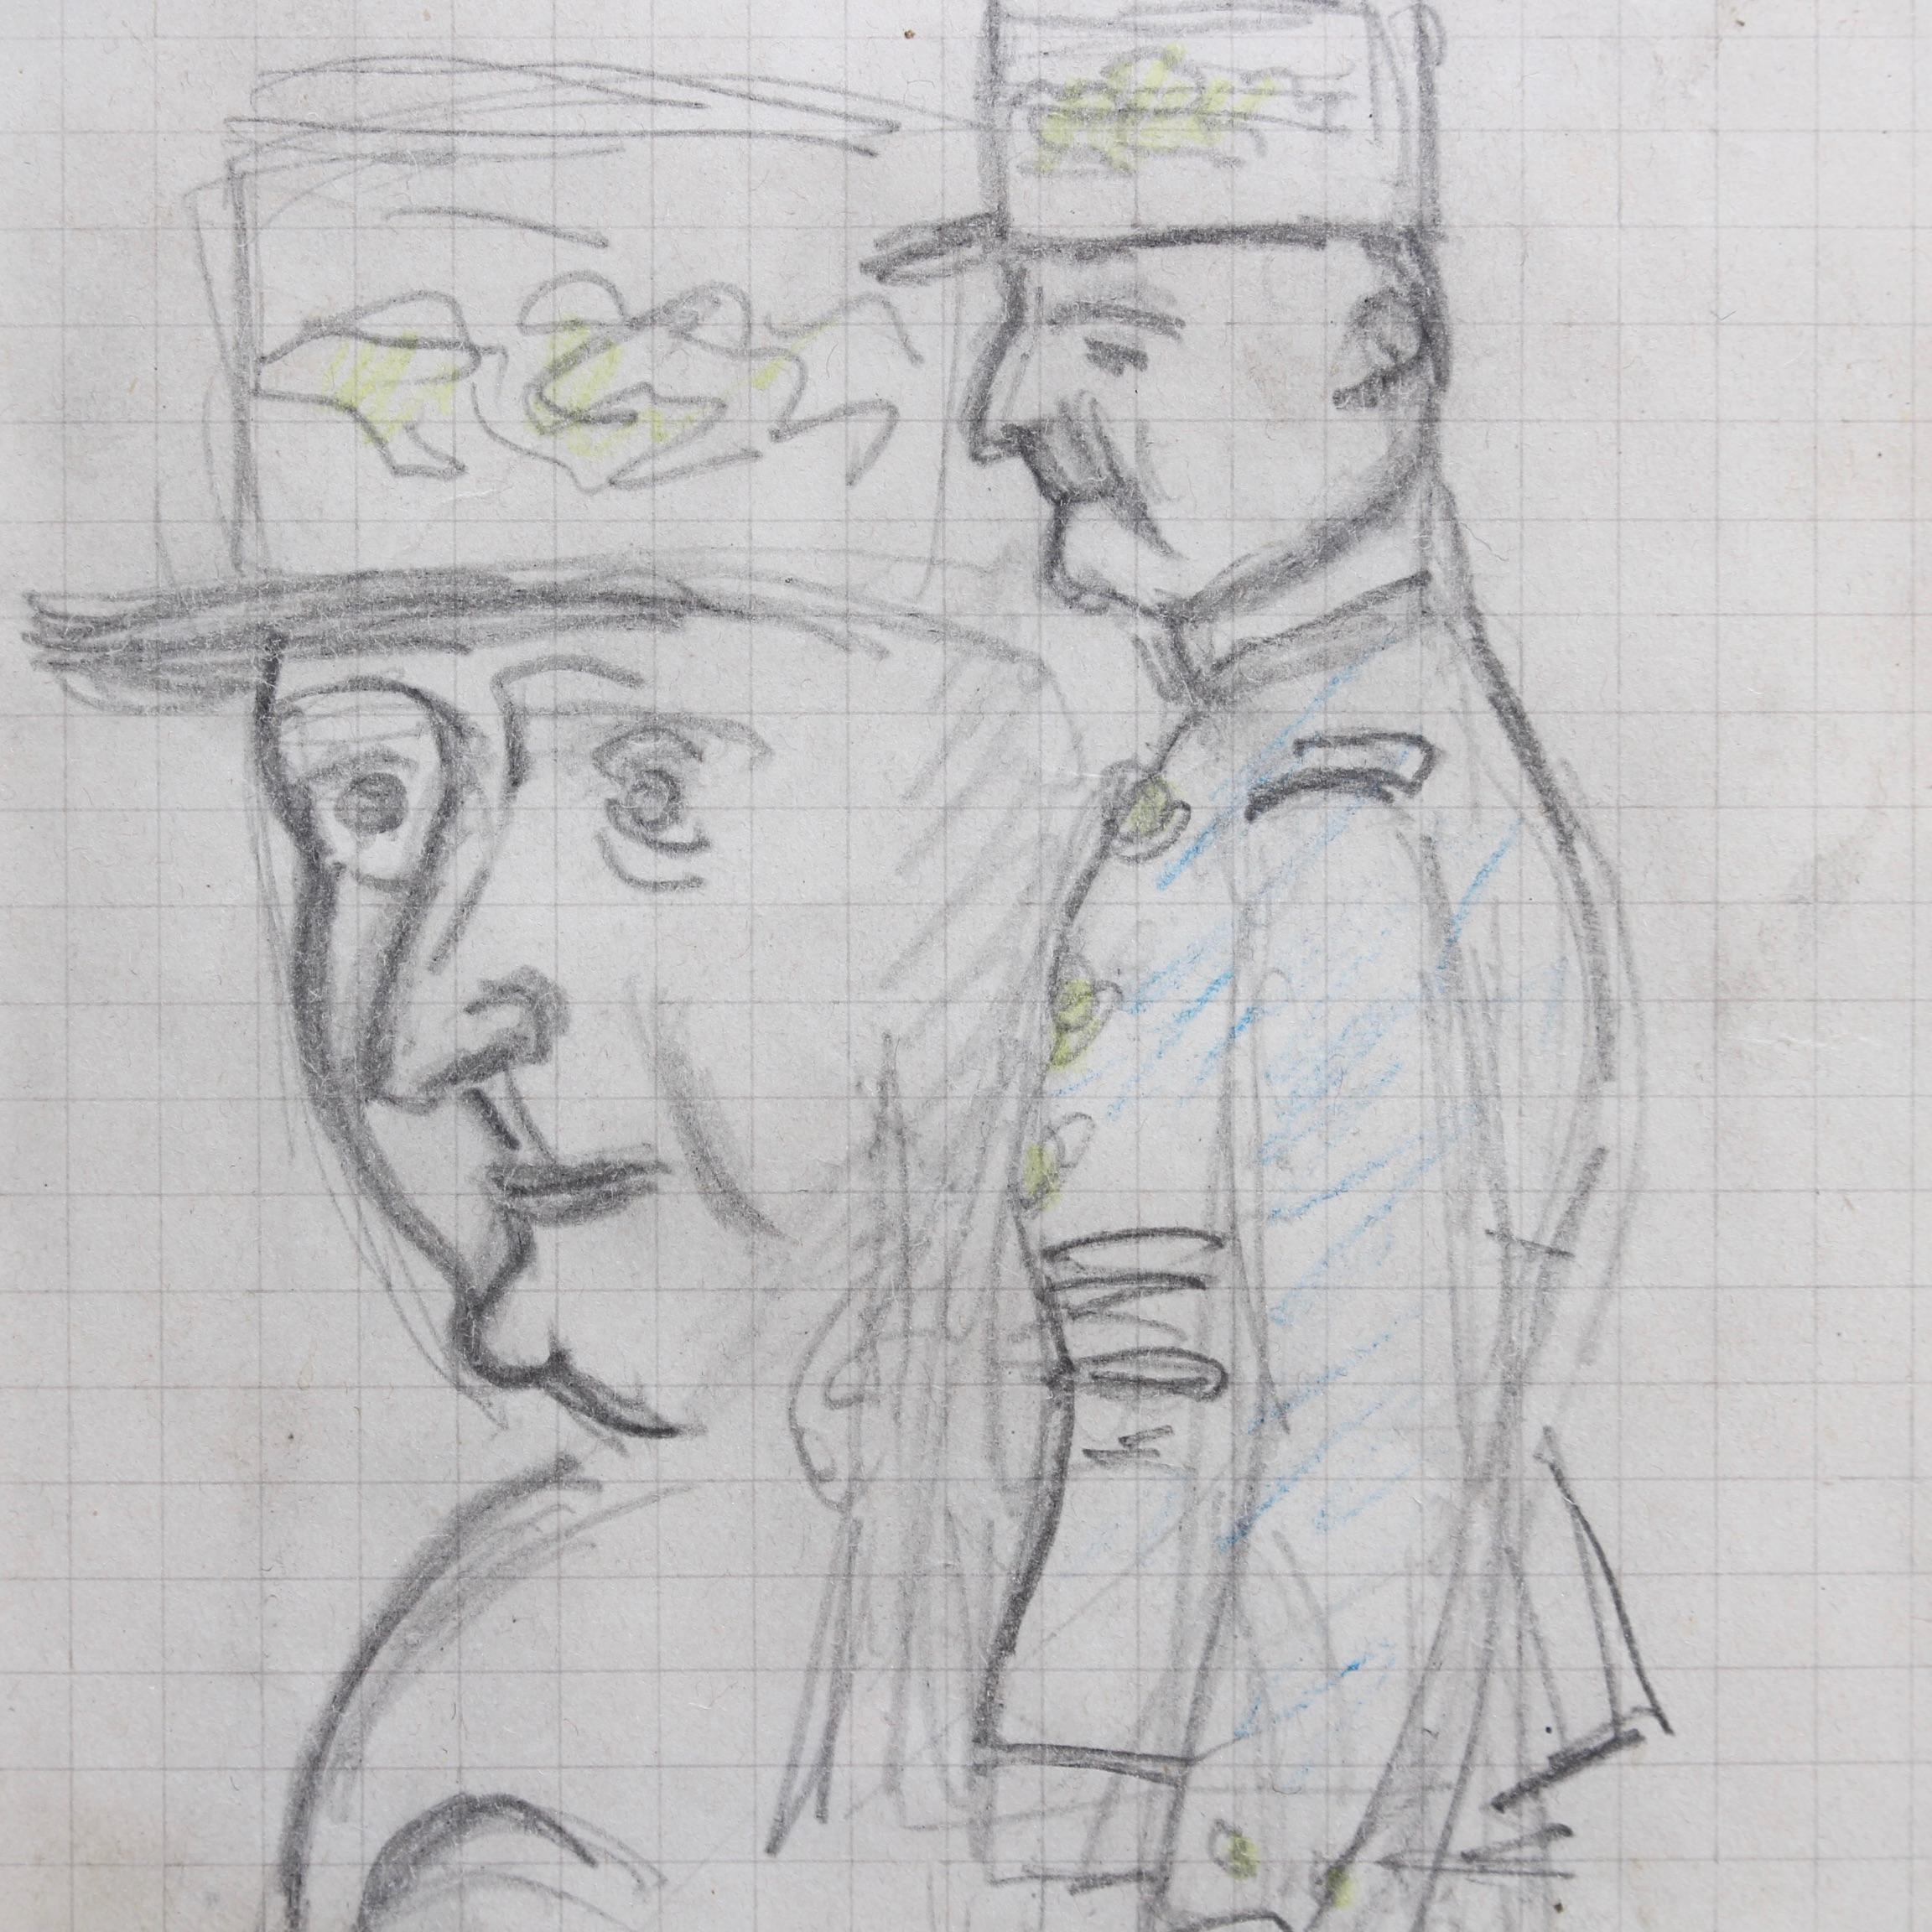 'Mon Colonel', pencil and crayon on paper, by noted French artist, Auguste Chabaud (circa 1914-1918). A delightfully simple drawing of a French Army colonel in profile along with closer views of the figure with military covering and without.